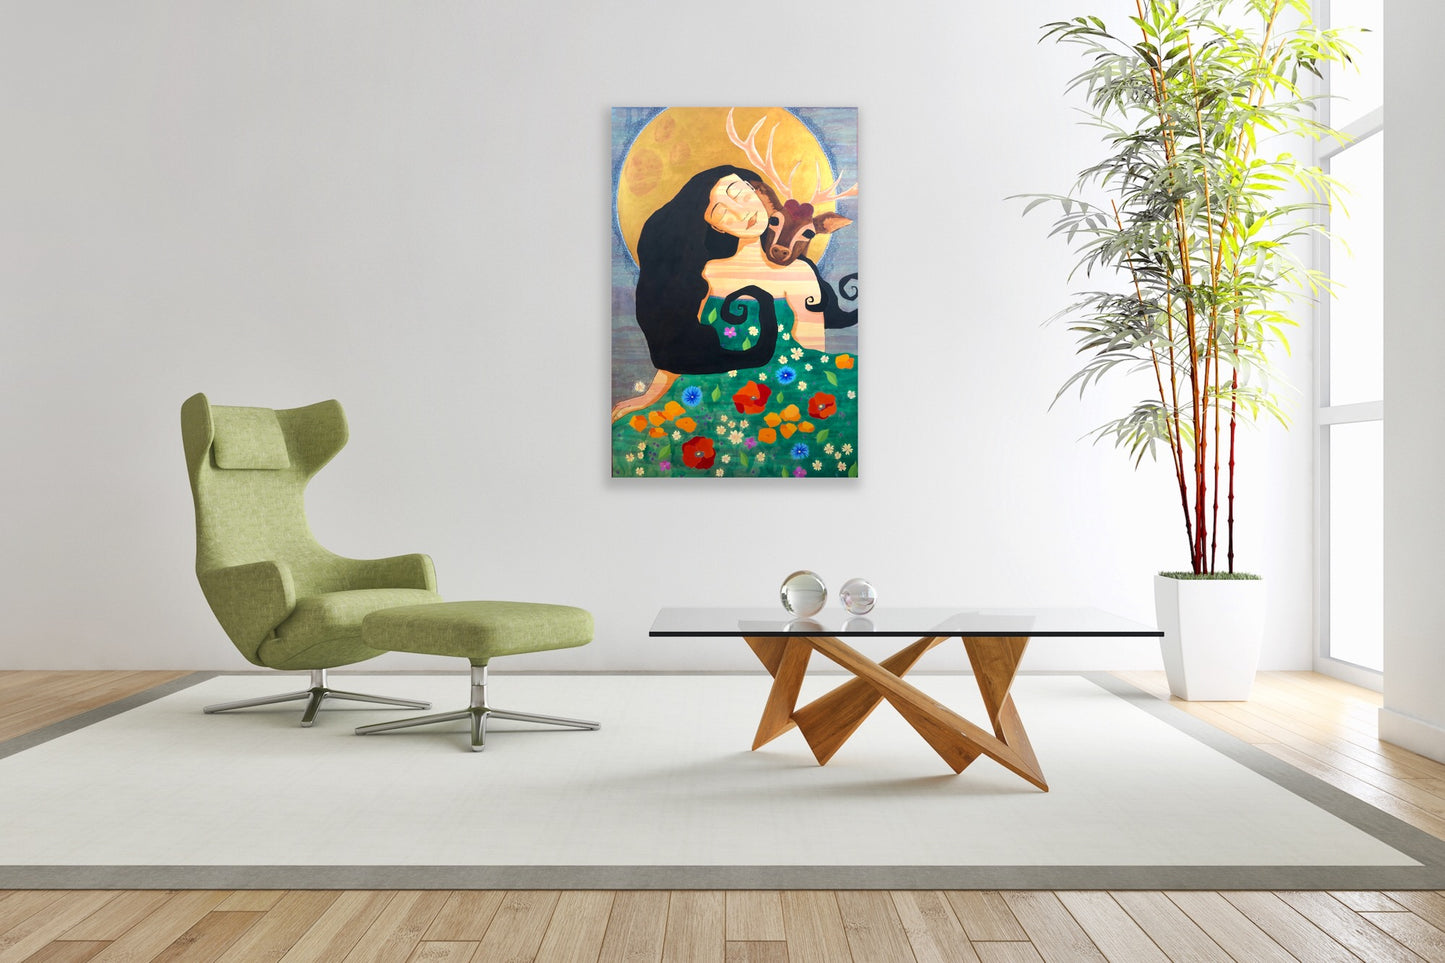 Living room decorated with a white rug, glass and wood table, green chair, potted bamboo, and a striking painting of a woman and a deer in front of a full moon.